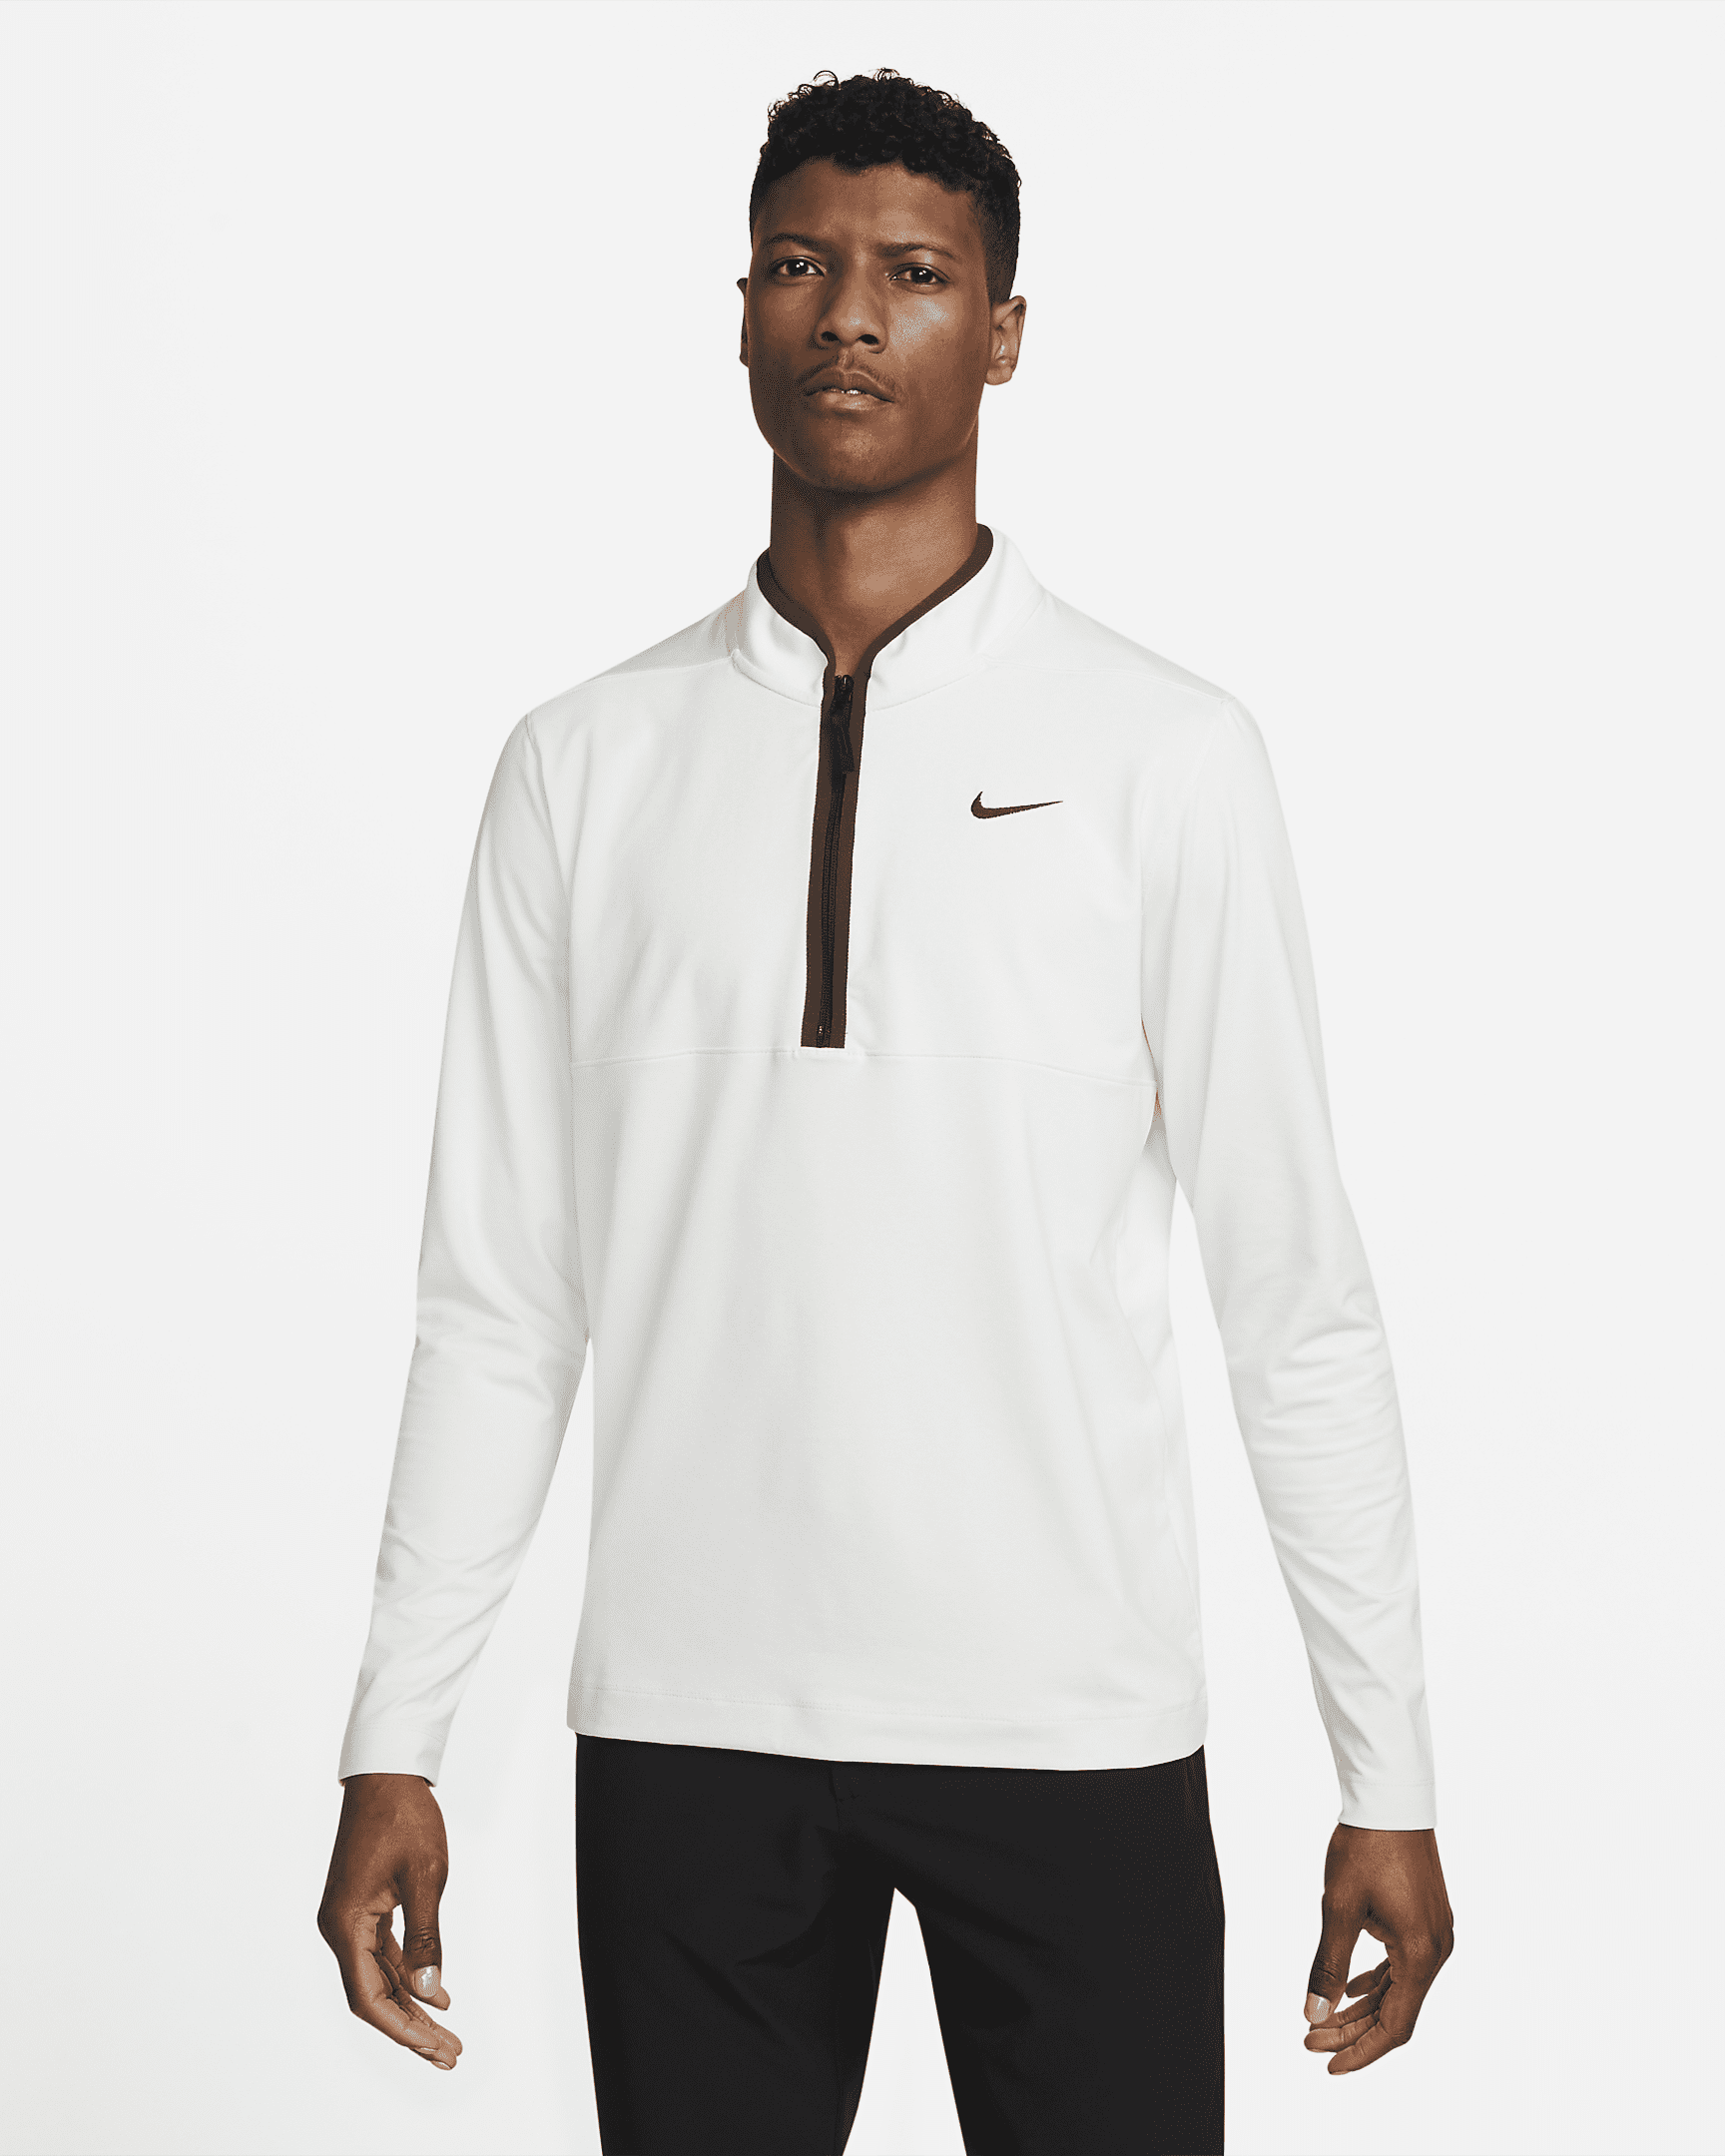 This Nike half-zip is comfortable and won't hinder your swing